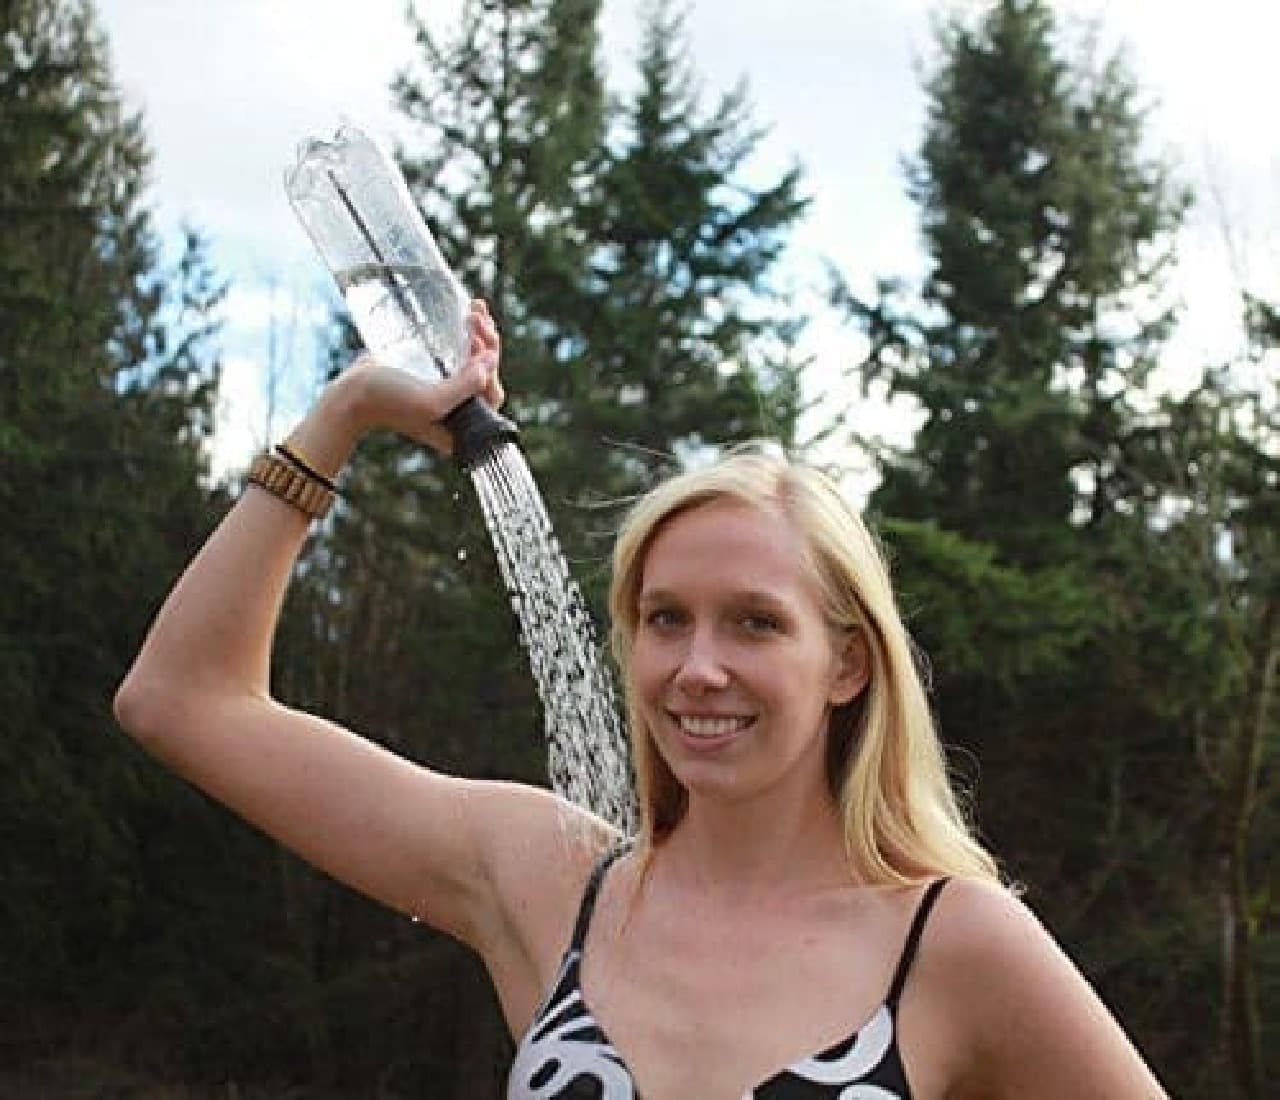 "Portable Camping Shower" that turns a PET bottle into a shower